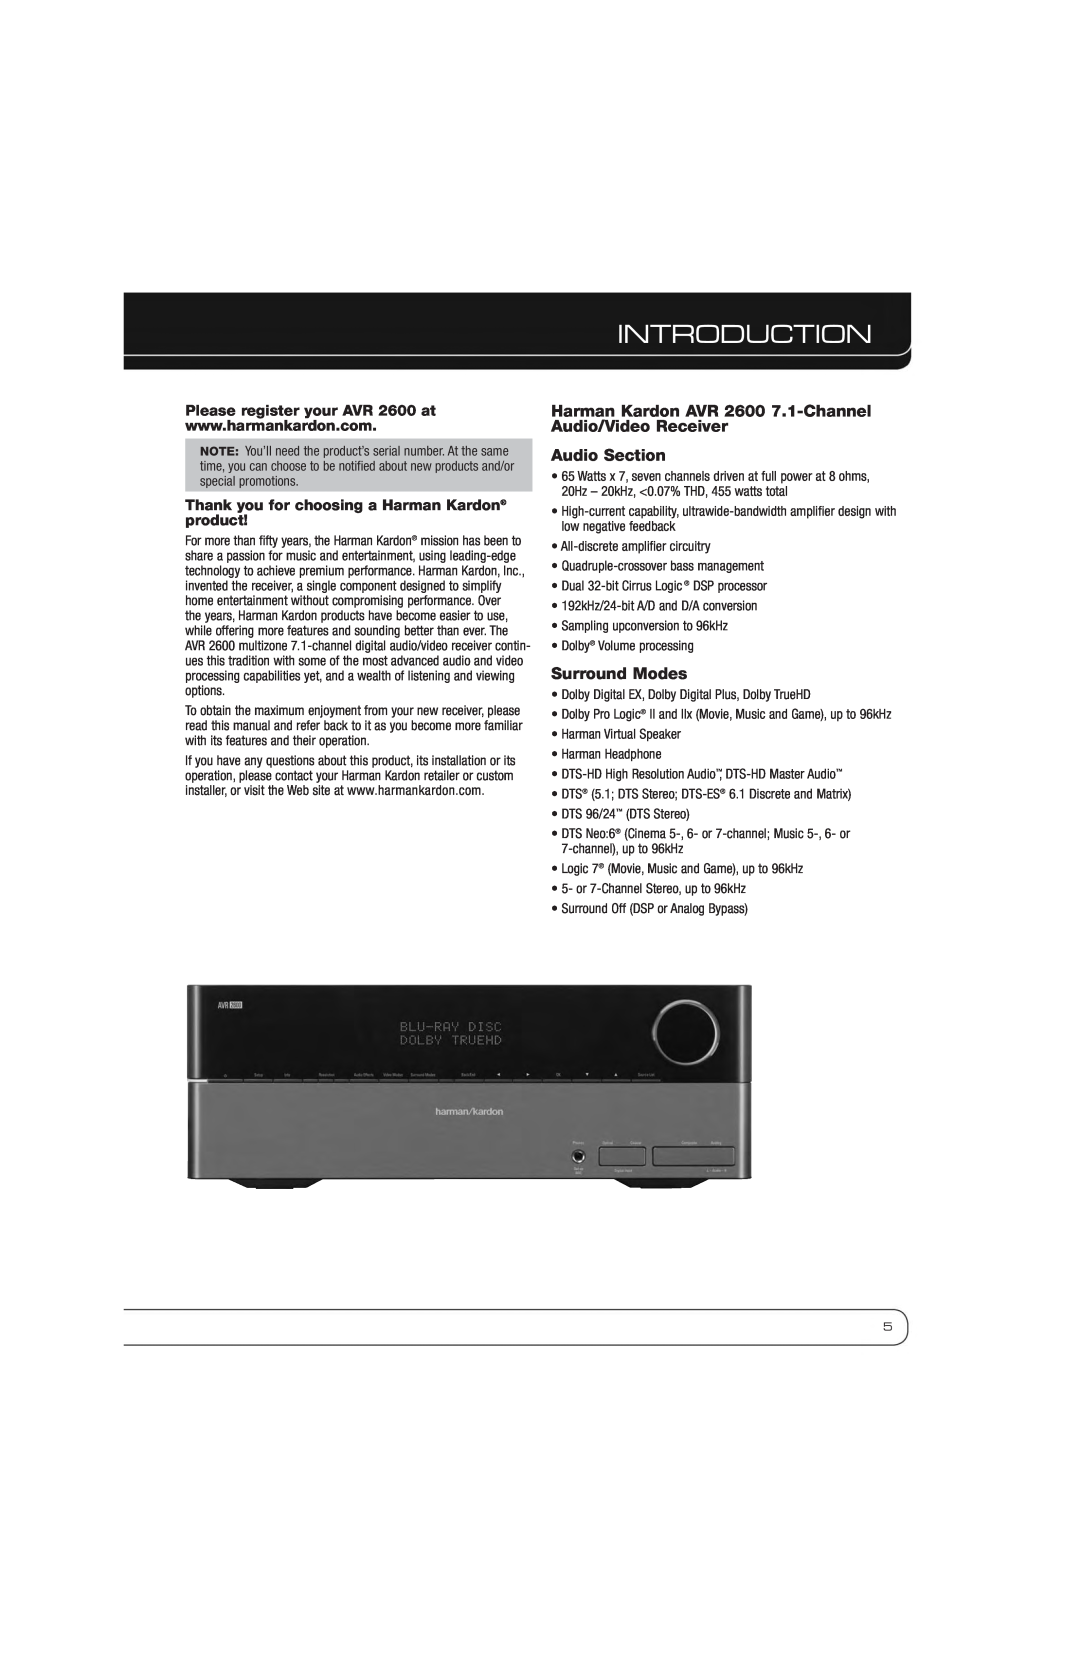 Harman owner manual Introduction, Audio Section, Surround Modes, Please register your AVR 2600 at 